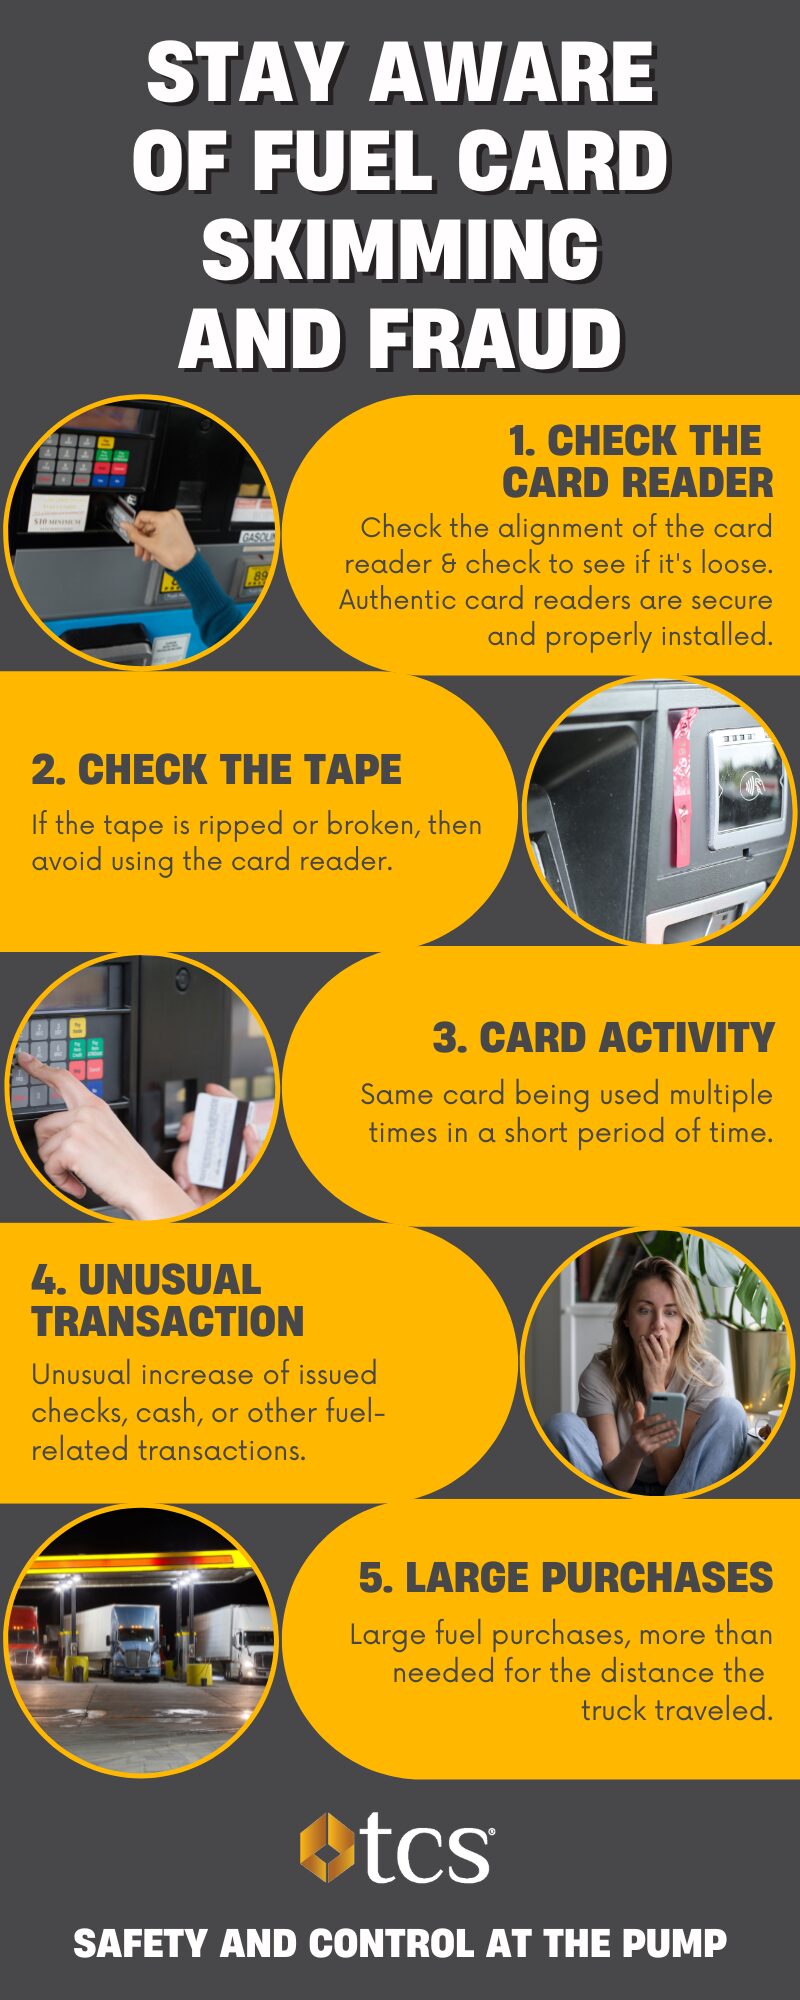 Tips to protect yourself from Fuel Card Skimming and Fraud